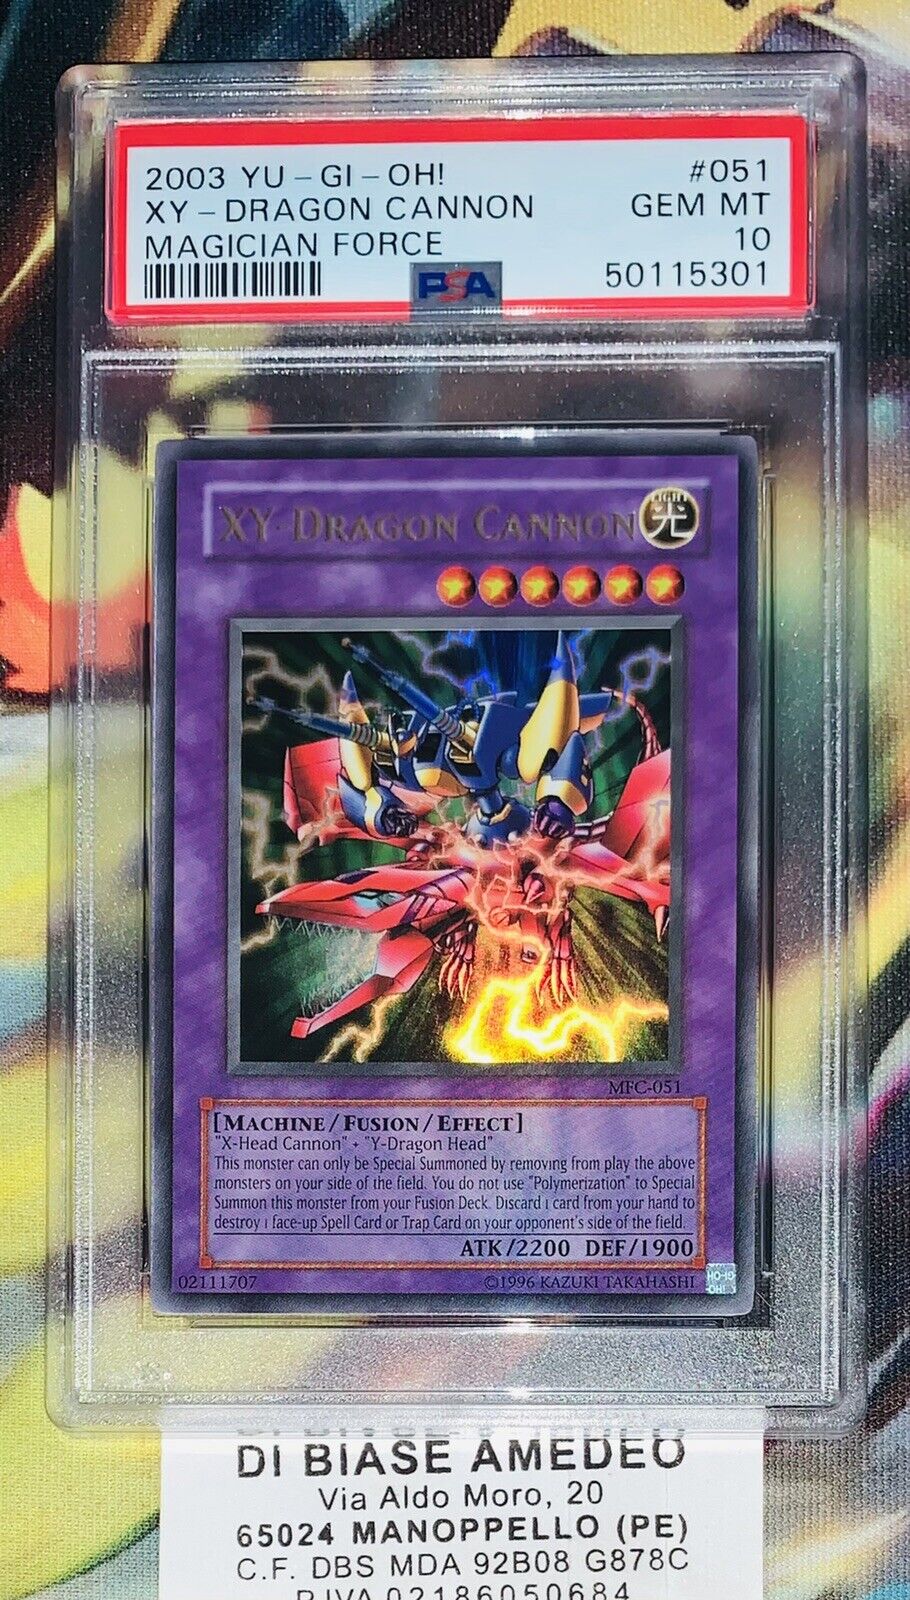  ️PSA 10 XY-DRAGON CANNON MFC-051 MAGICIAN FORCE 2003